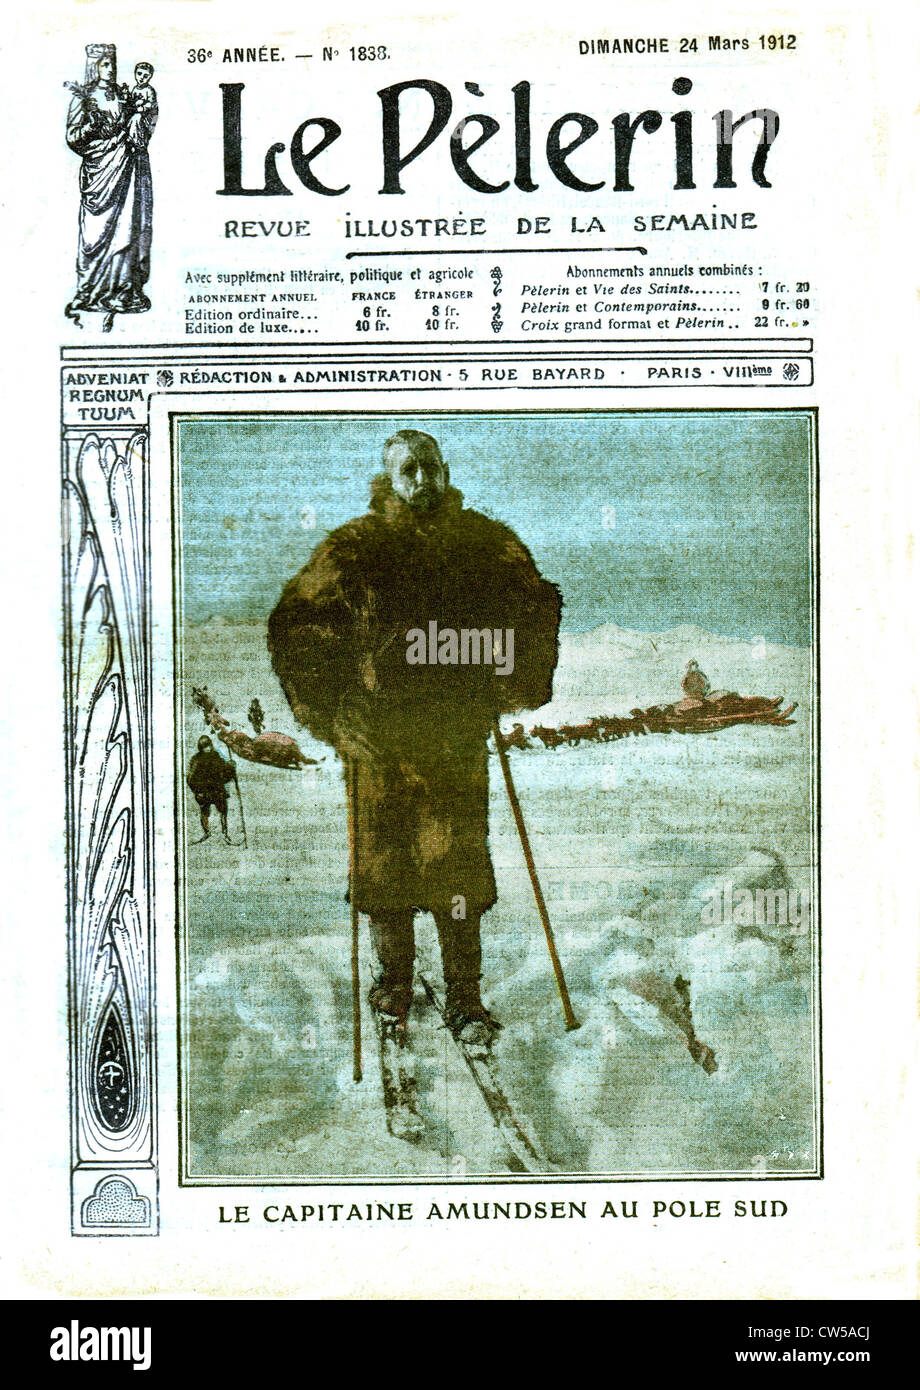 Captain Amundsen at the South Pole in 'Le Pèlerin' Stock Photo